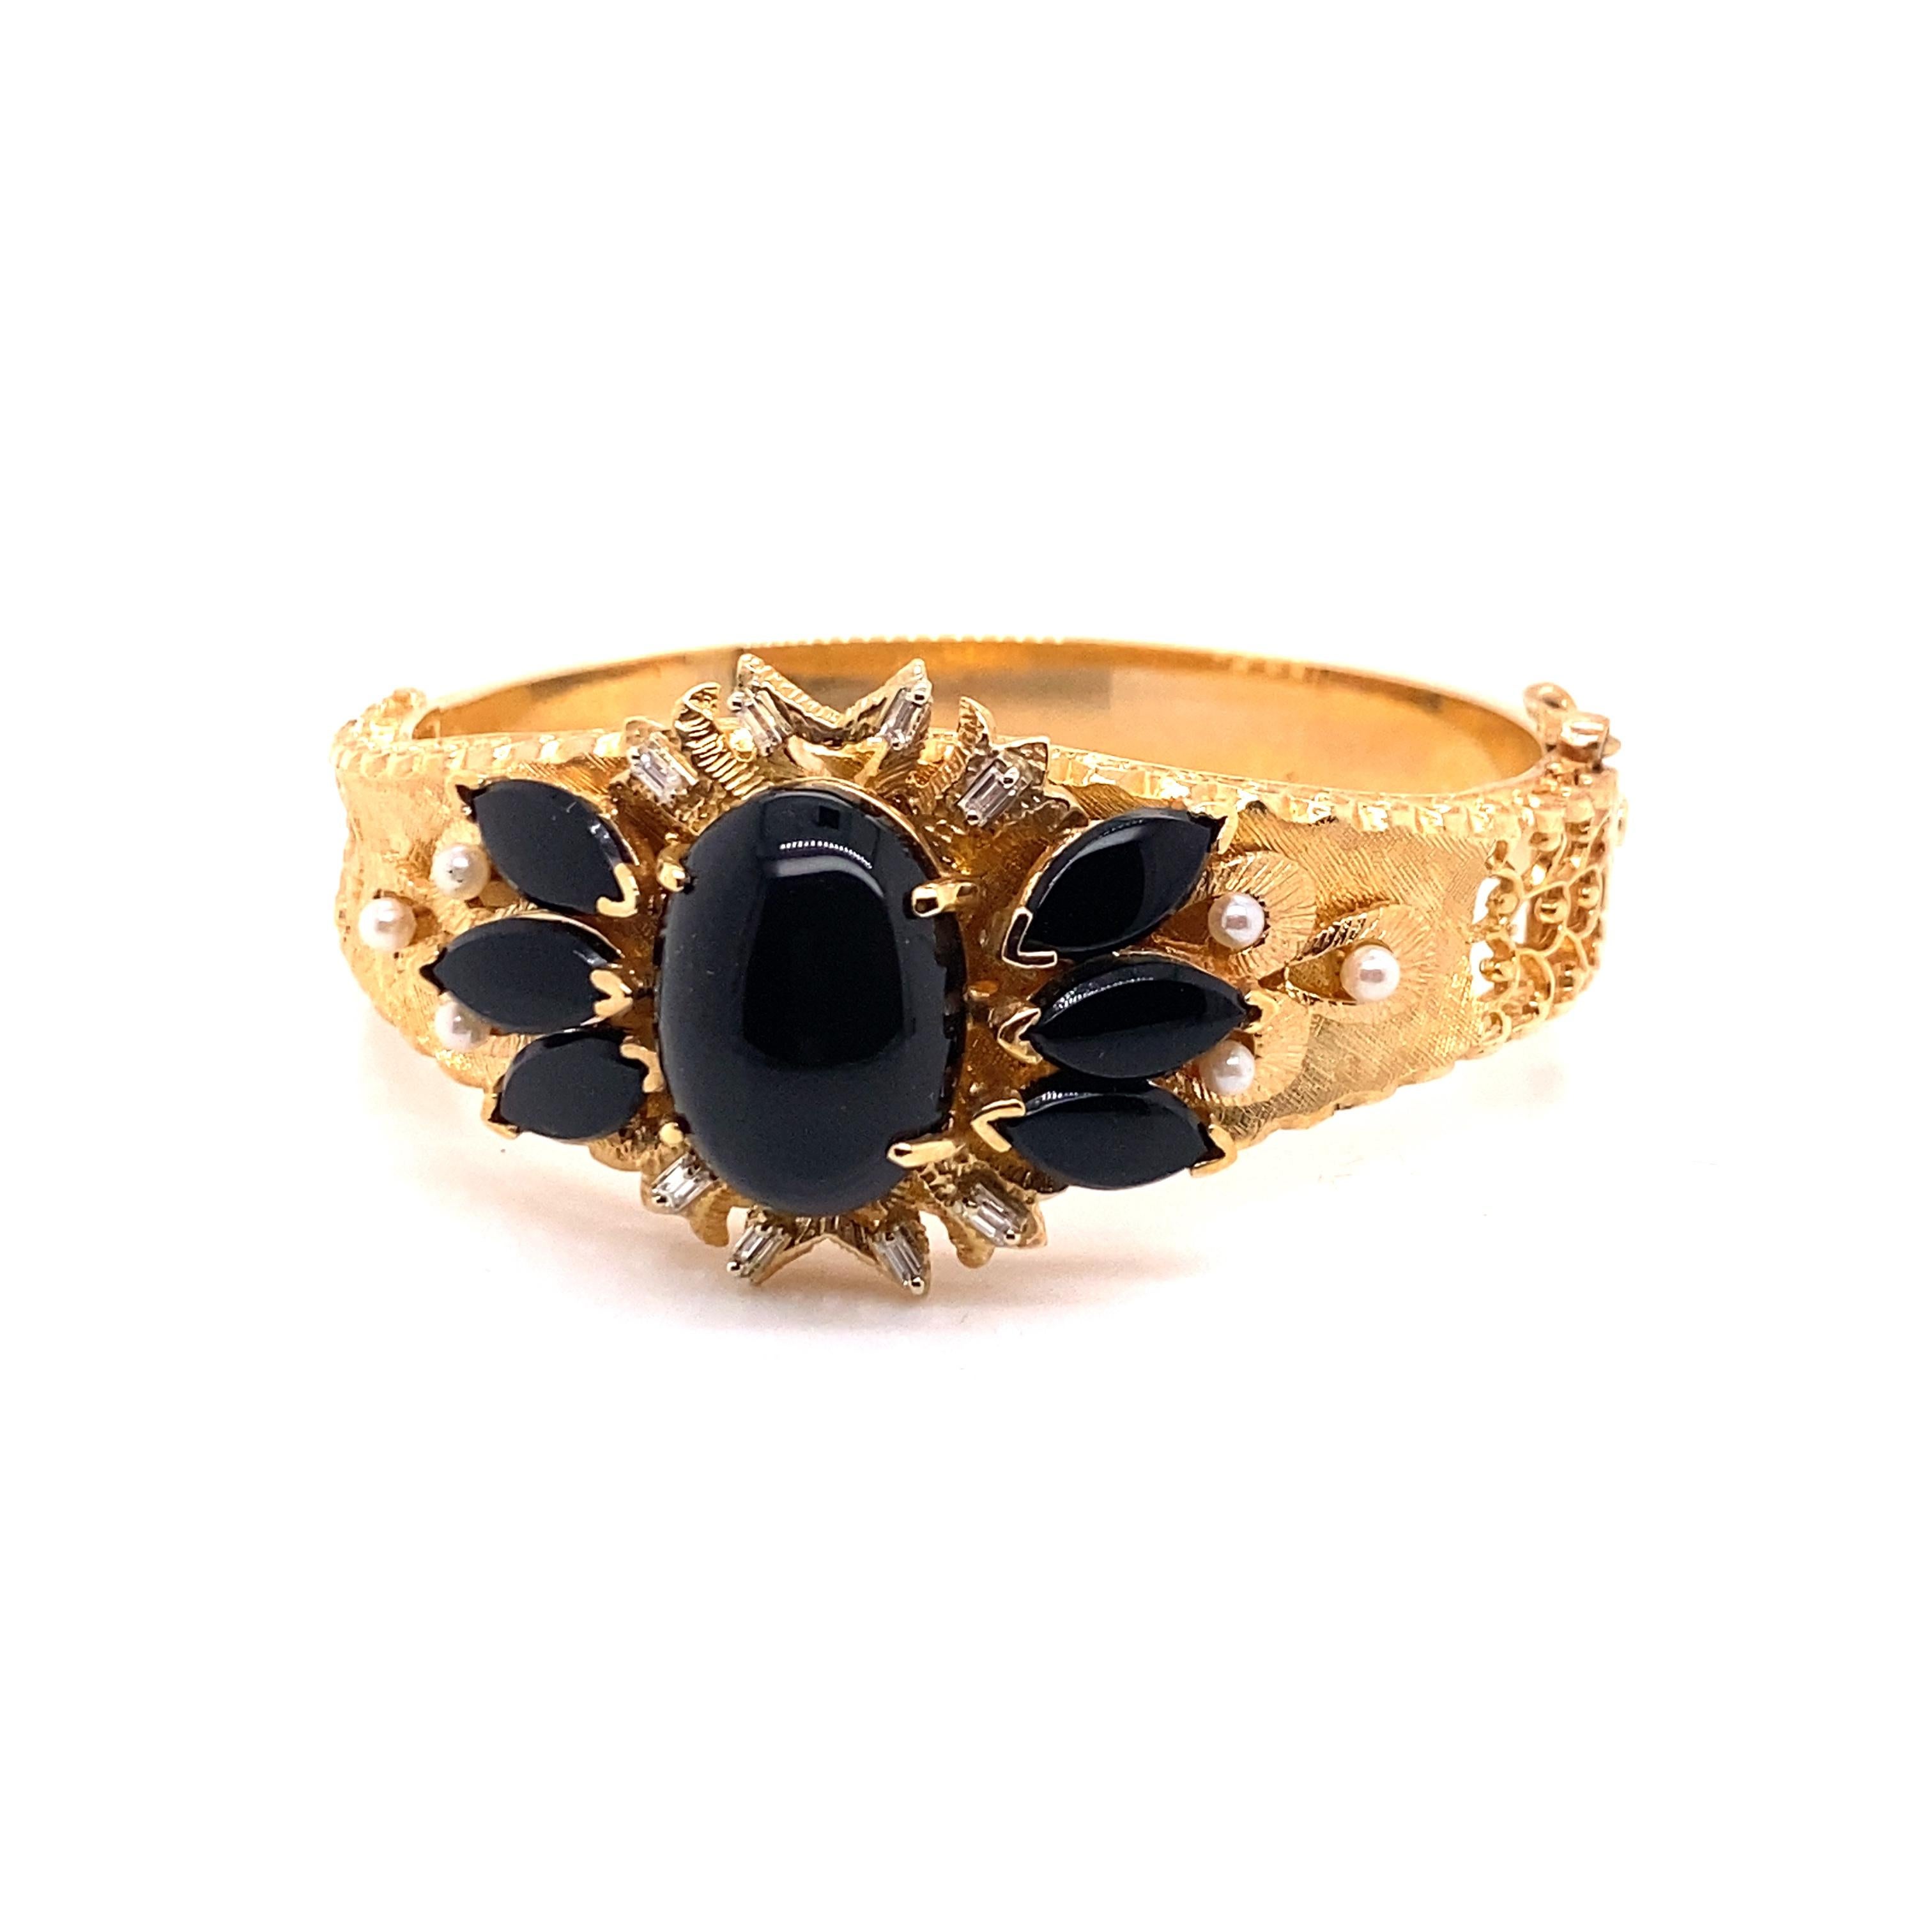 Vintage 1980's 14K Yellow Gold Onyx Bangle Bracelet - The center oval onyx measures 18 x 13mm, and the 3 marquise onyx on each side measure 10 x 5mm. The bangle contains 8 straight baguette diamonds and 6 seed pearls for added detail. The diamonds